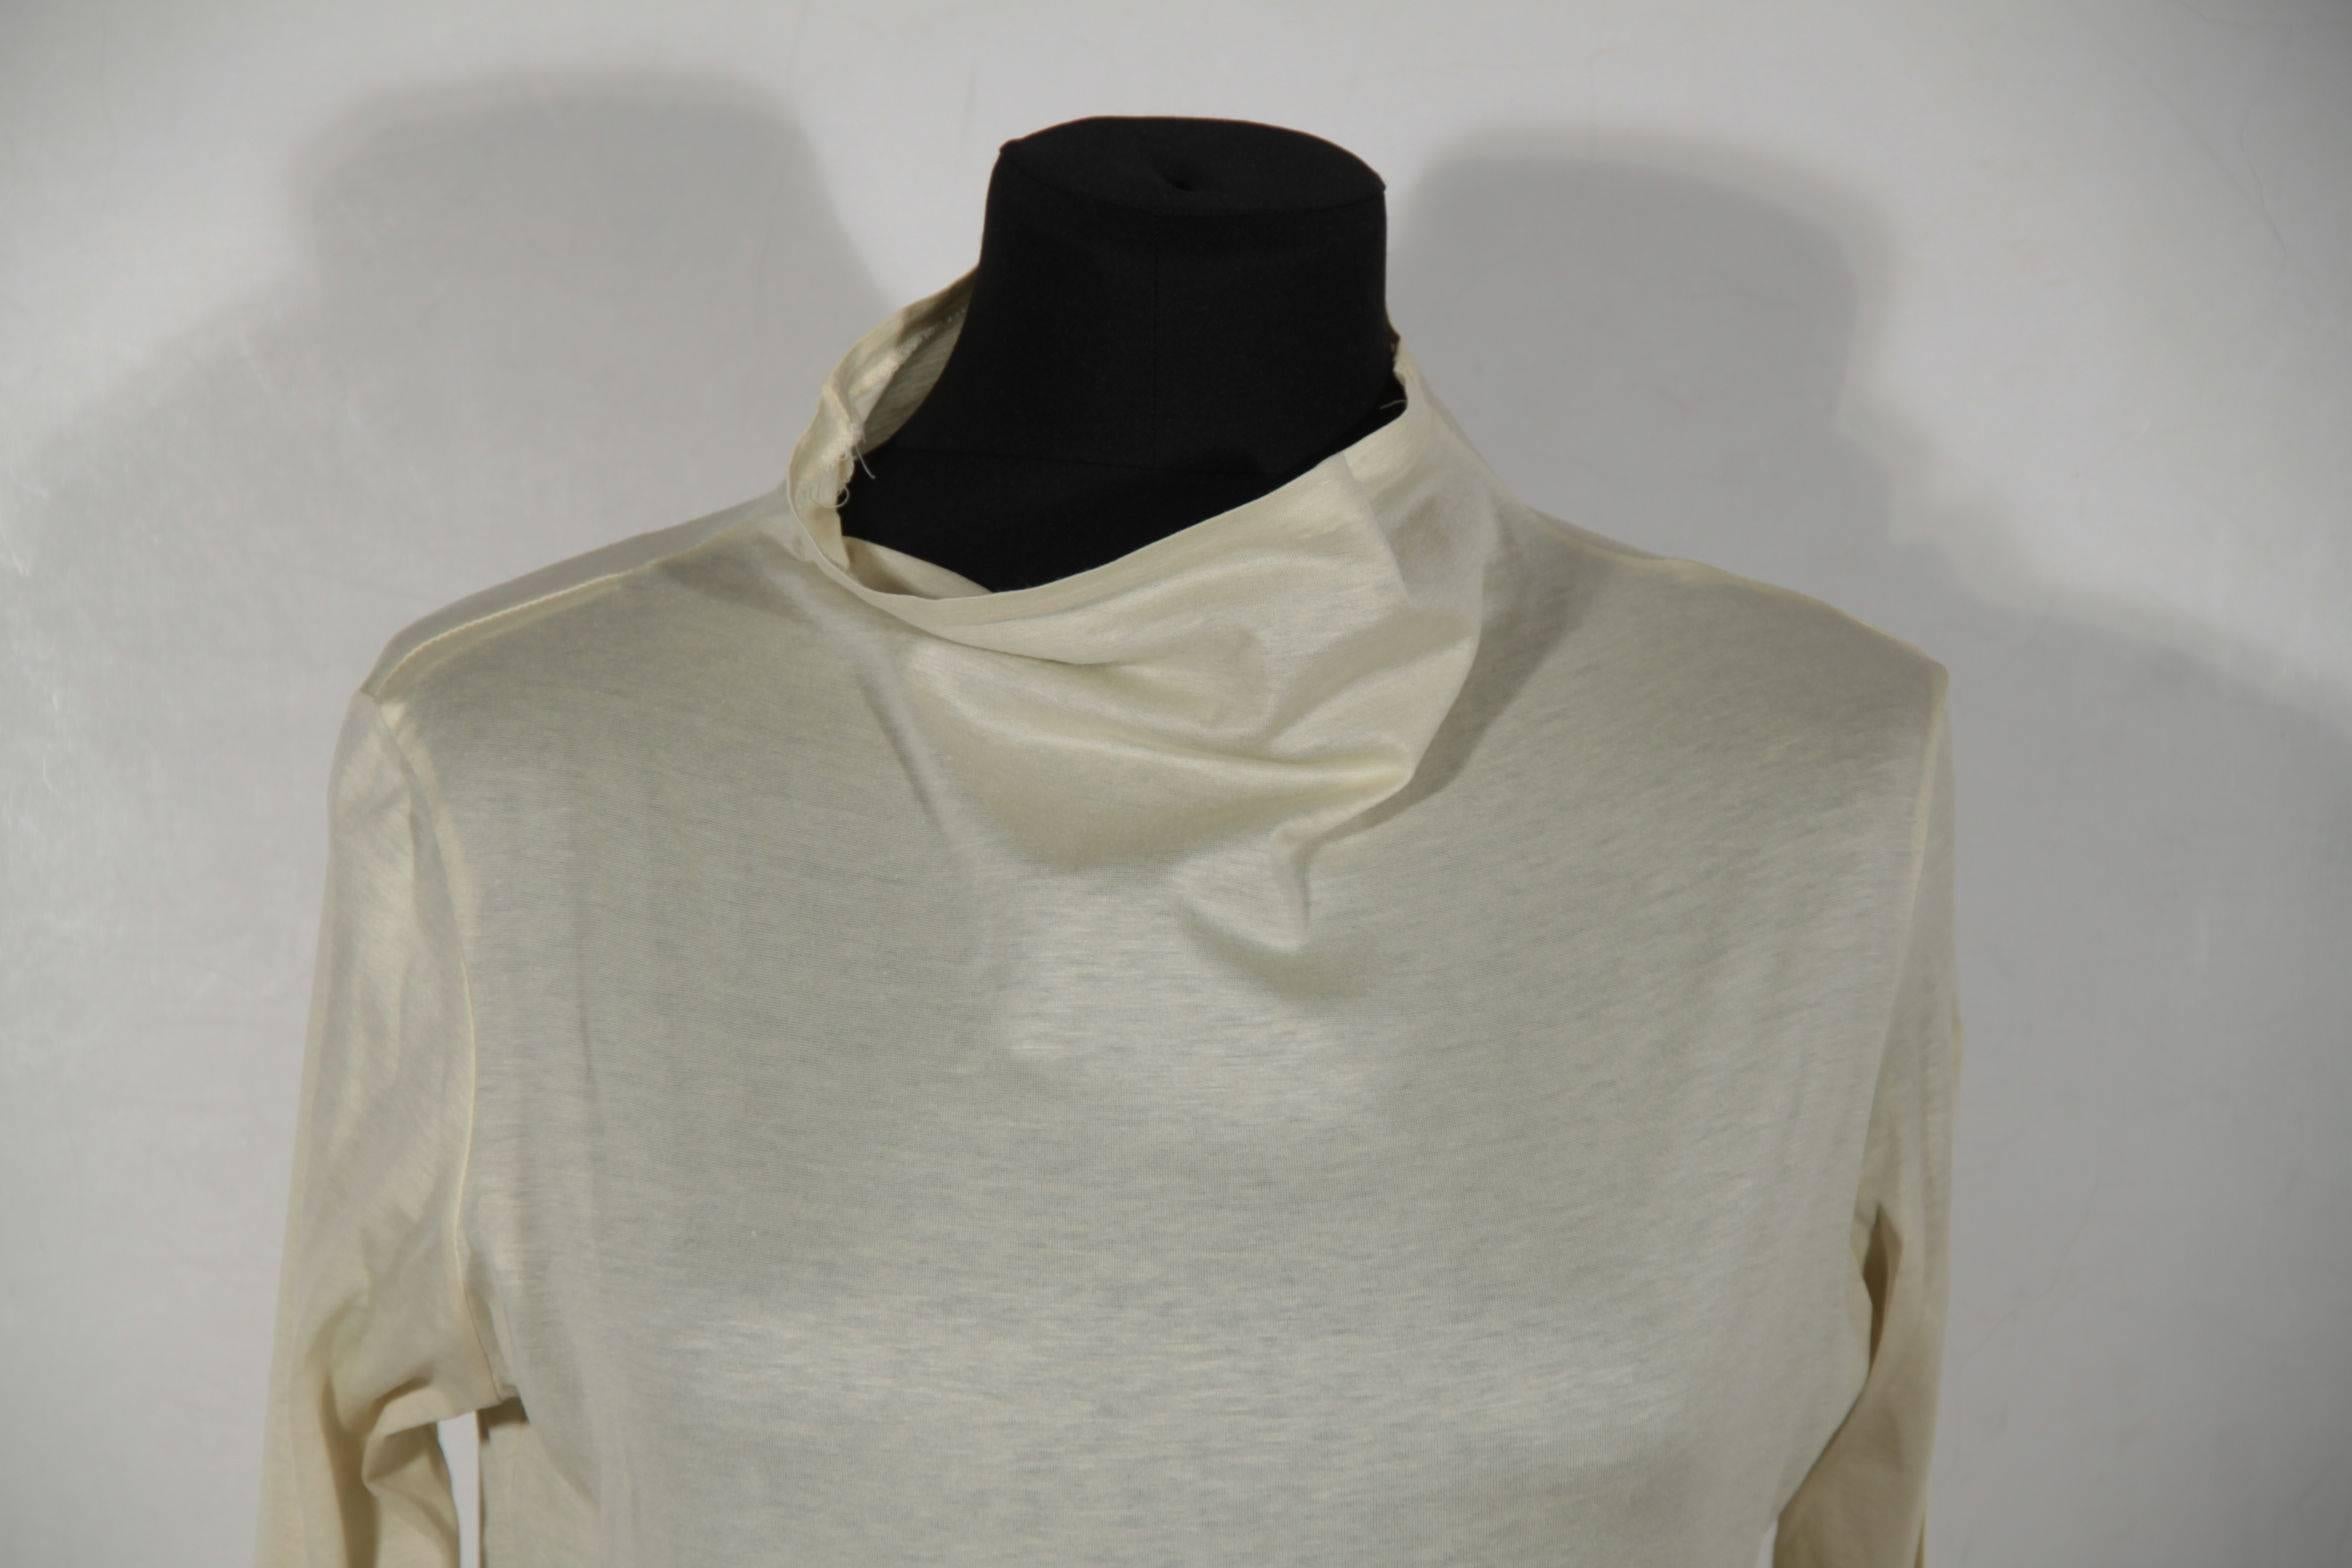 - Long sleeve styling

- Funnel collar

- Composition tag is missing! It seems to be cotton

Logos / Tags: 'YOHJI YAMAMOTO' siganture tag, size tag (MEDIUM)

Condition (please read our condition chart below):VERY GOOD: Previously worn with